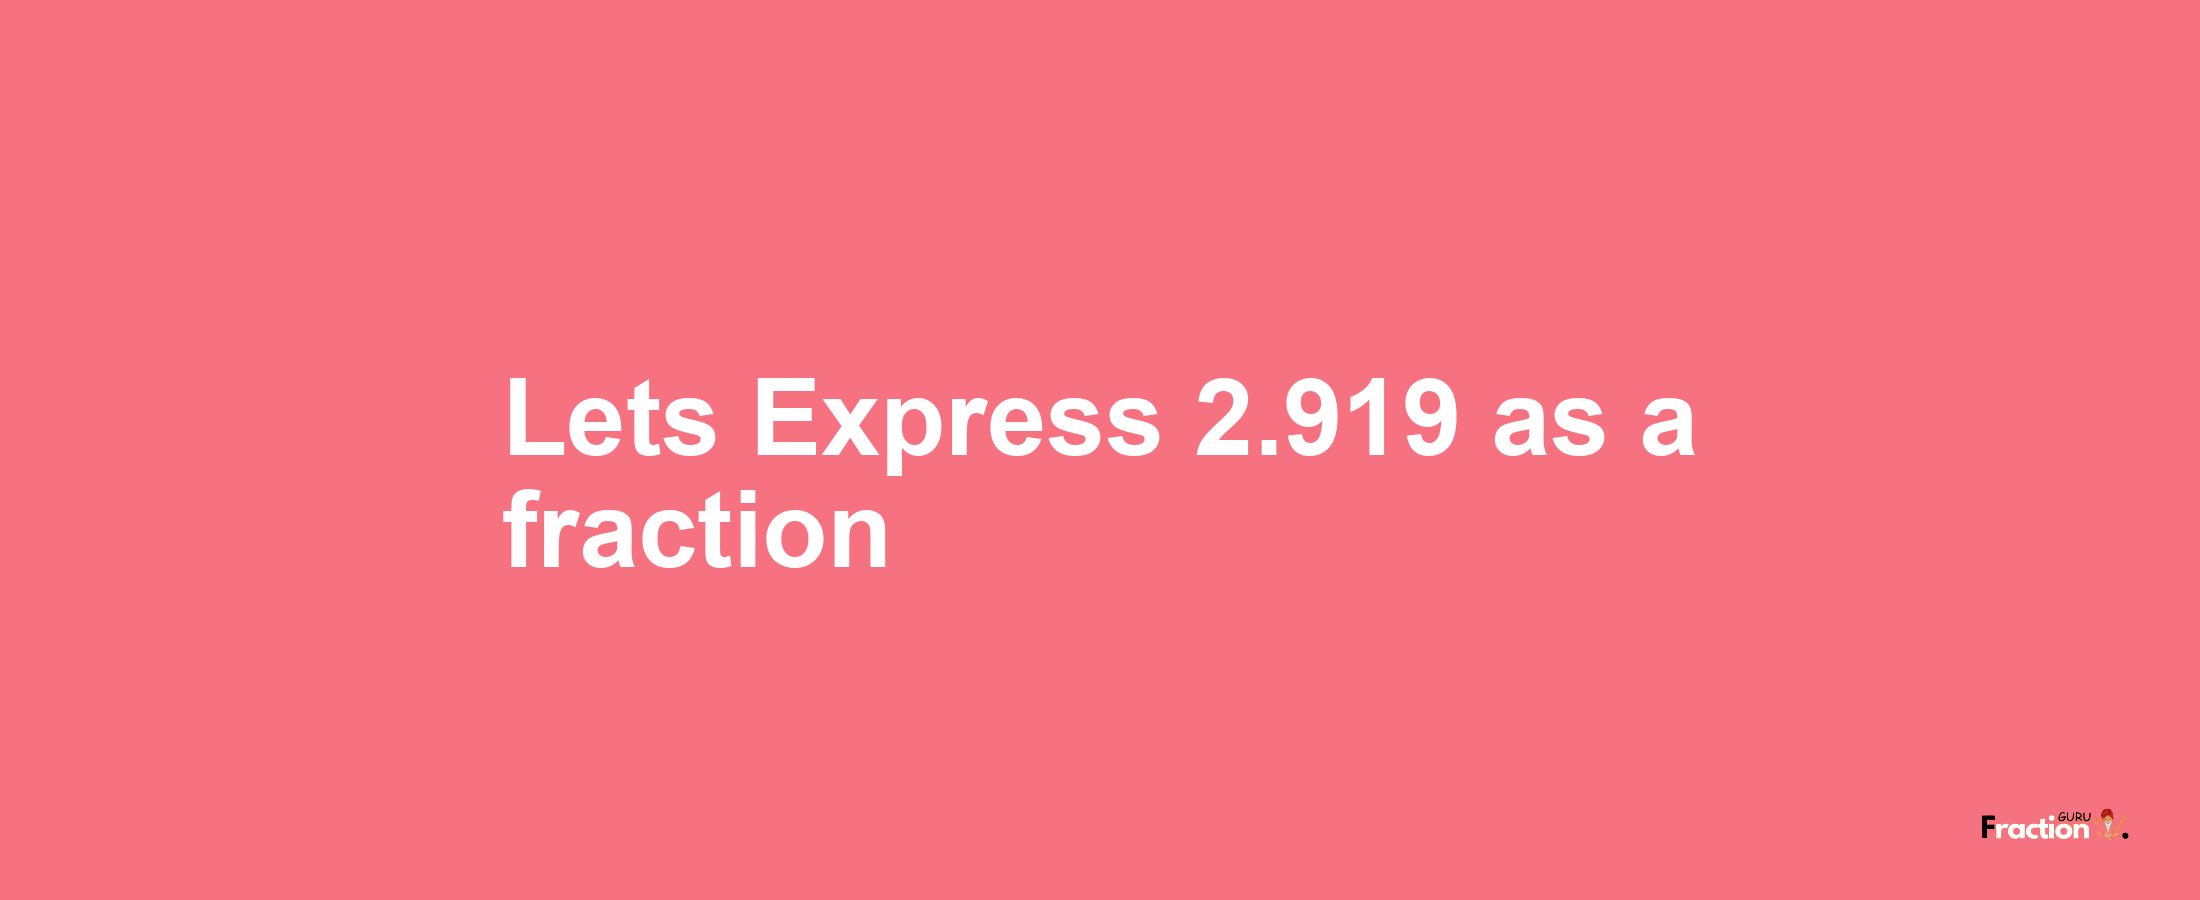 Lets Express 2.919 as afraction